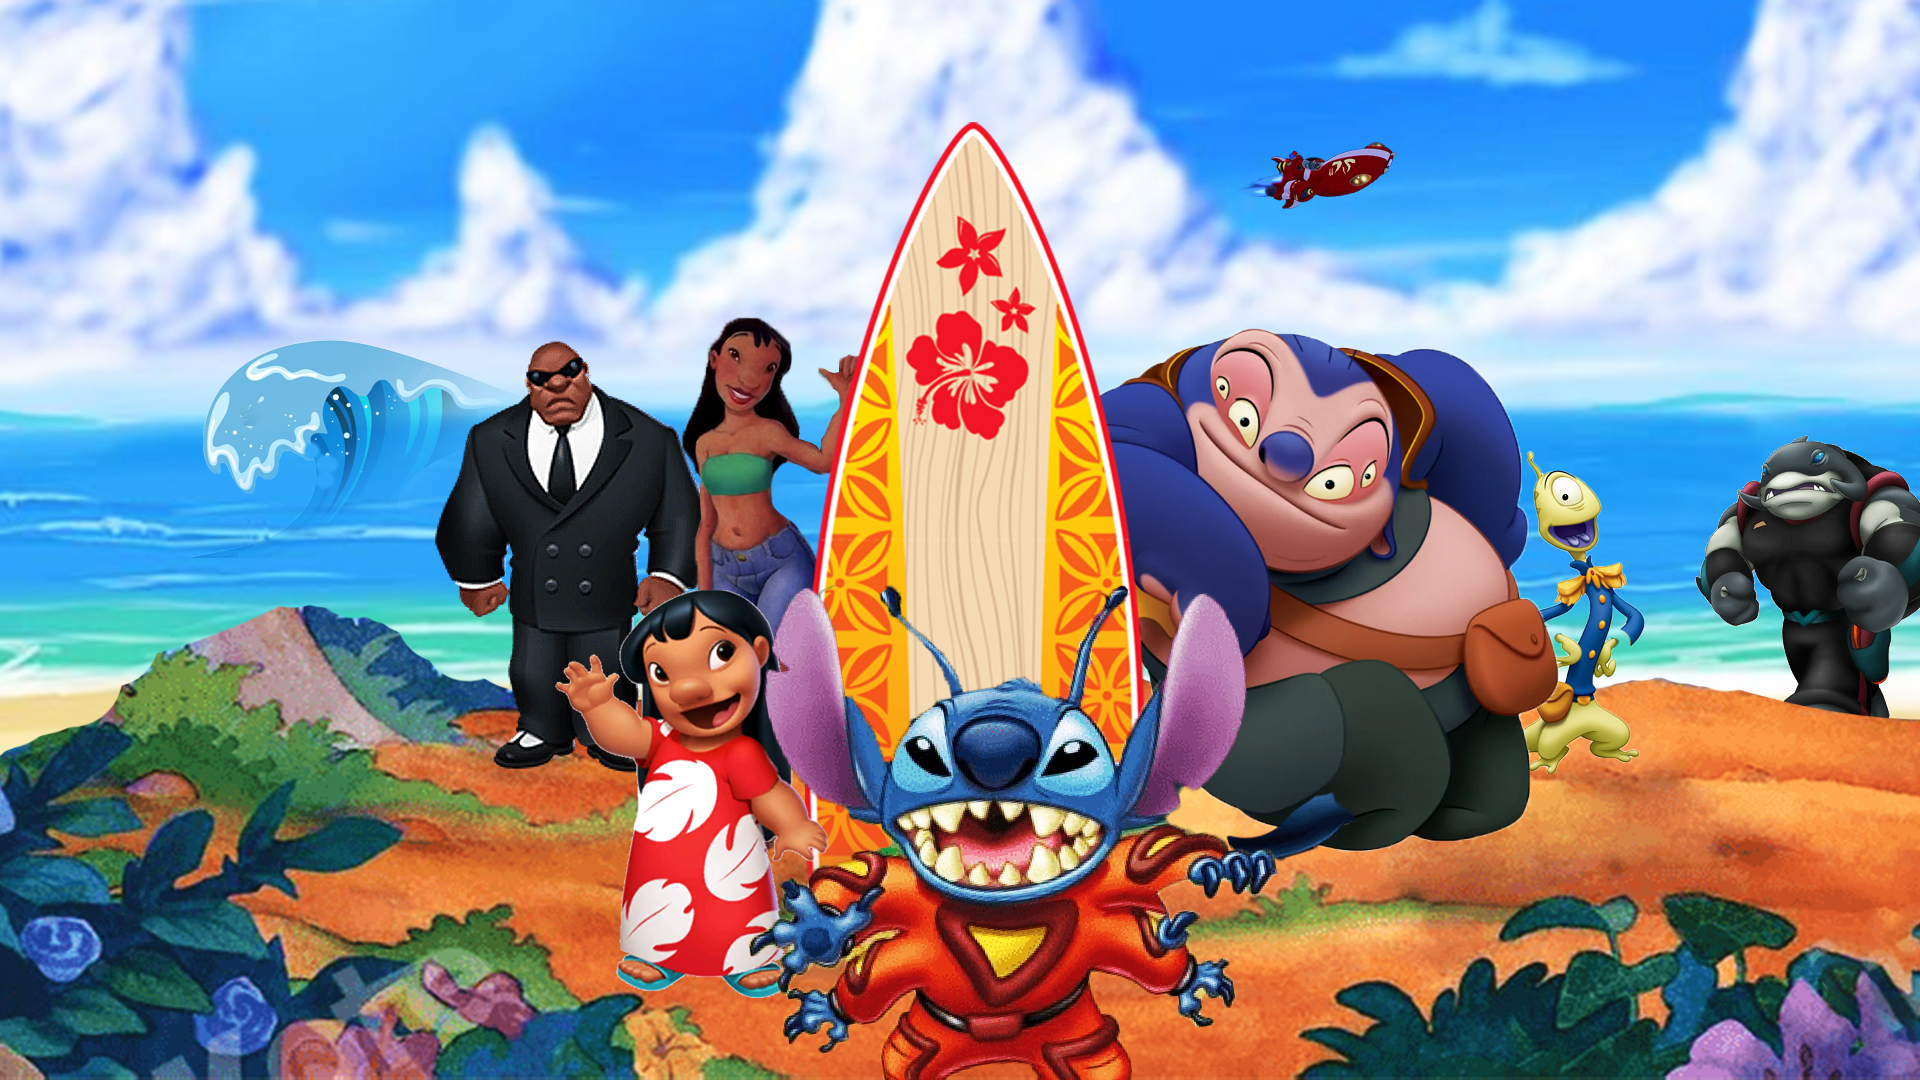 626 Day: Lilo and Stitch Wallpaper - 20th Ann. by Thekingblader995